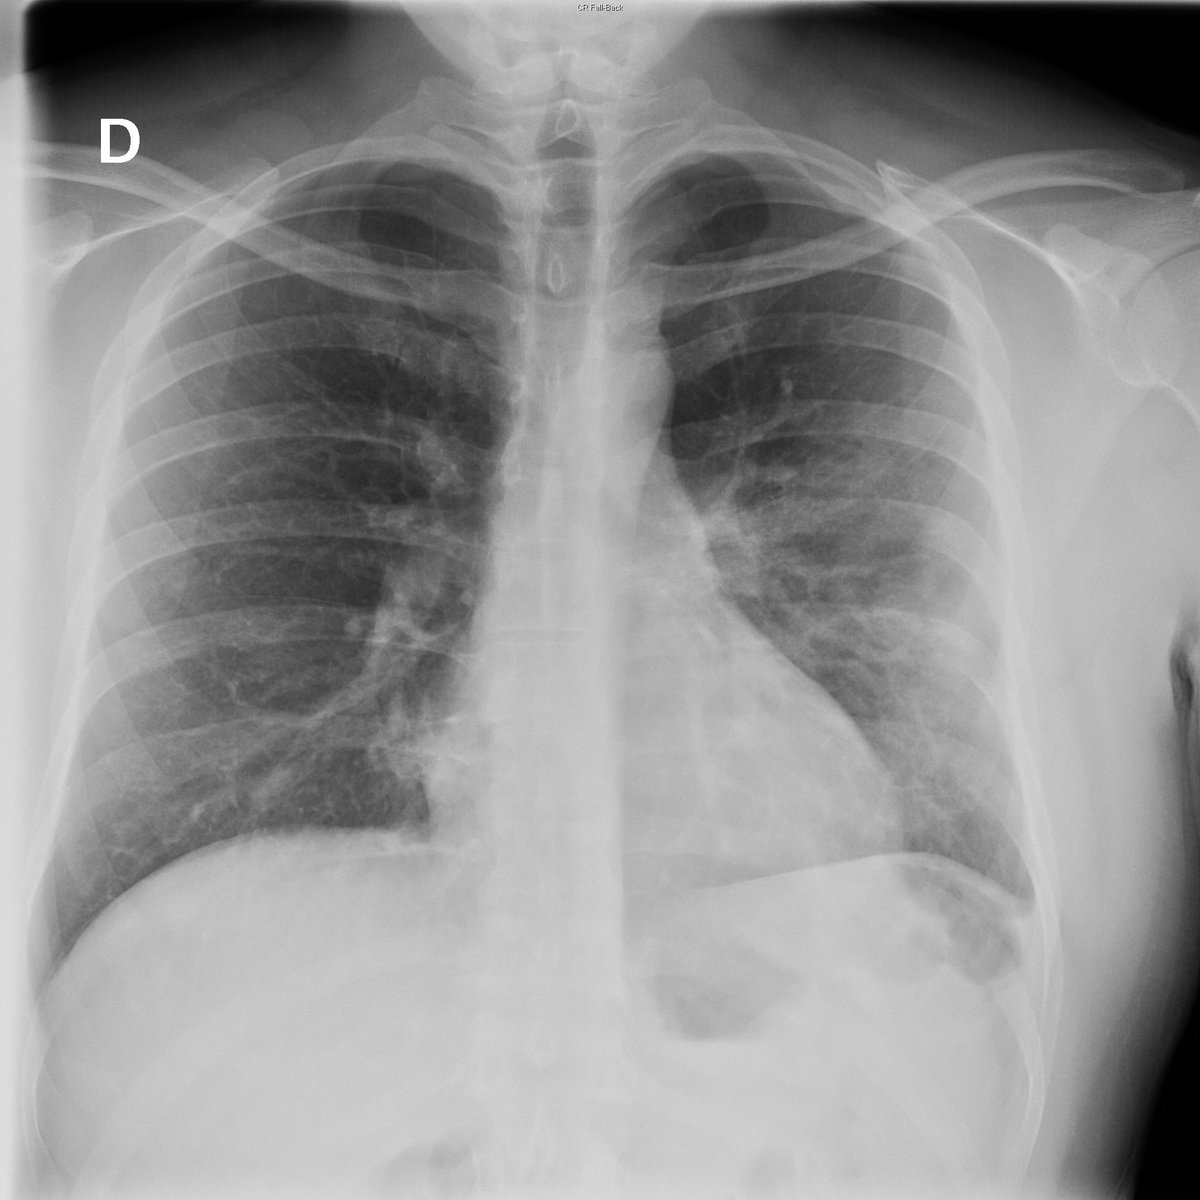 Case 50. 24yo male (youngest patient with COVID pneumonia at my institution so far). Cough and fever. Day 1 and 4. Subtle left lung opacities with progresion towards extensive consolidation.